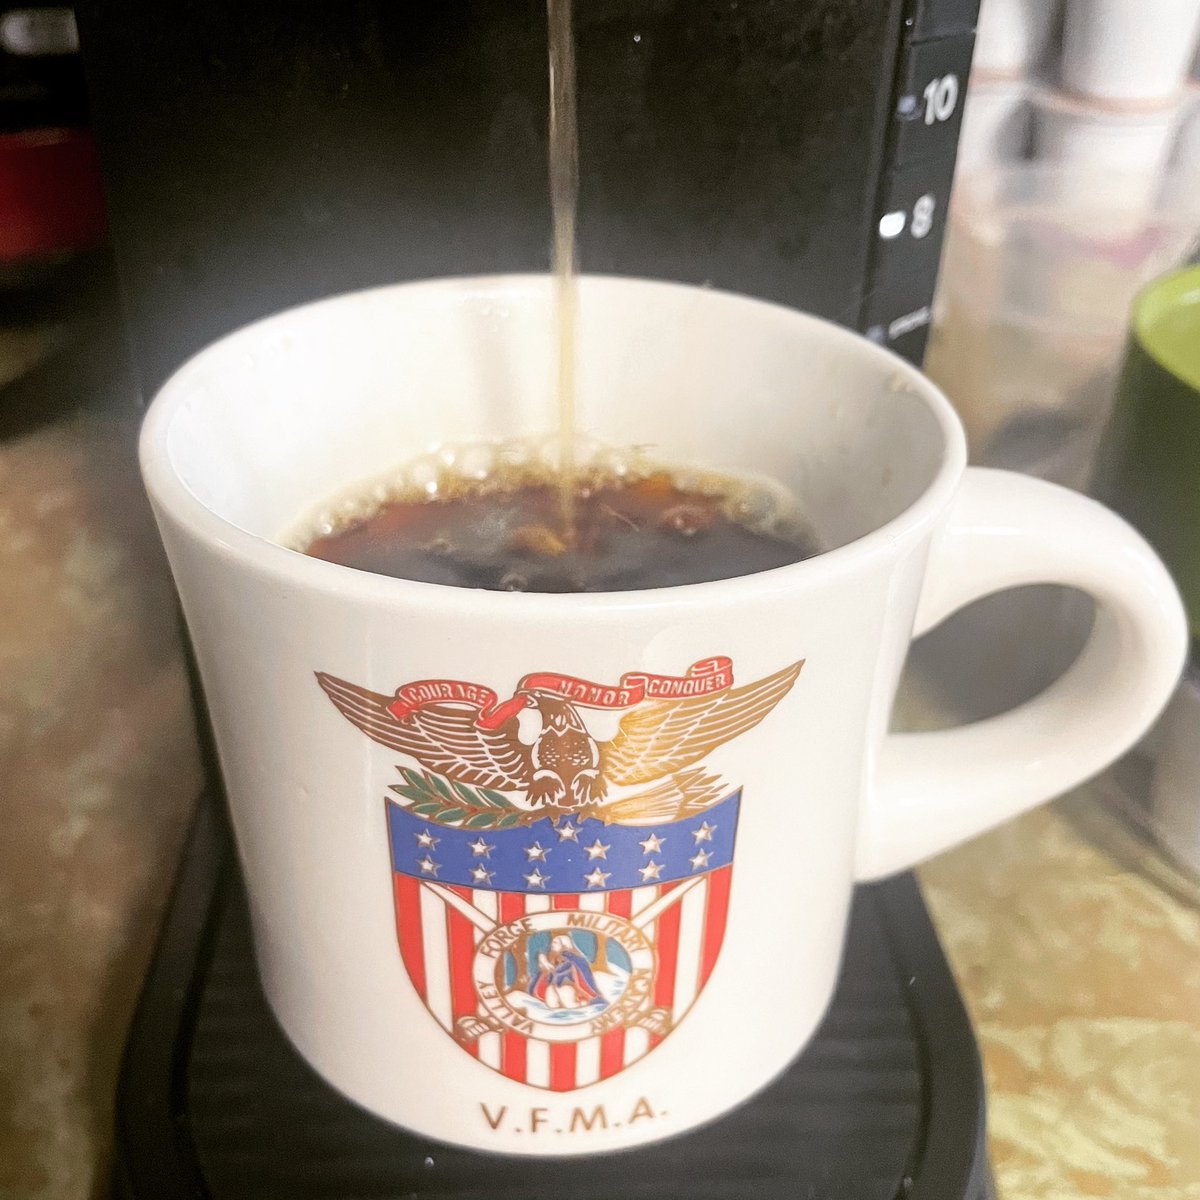 A vintage cup of joe is a great way to start a lazy Sunday …cheers! ☕️☀️ #coffee #coffeemug #vintagecoffeemug #vfma #valleyforge #valleyforgemilitaryacademy #militaryacademy #sunday #lazysunday